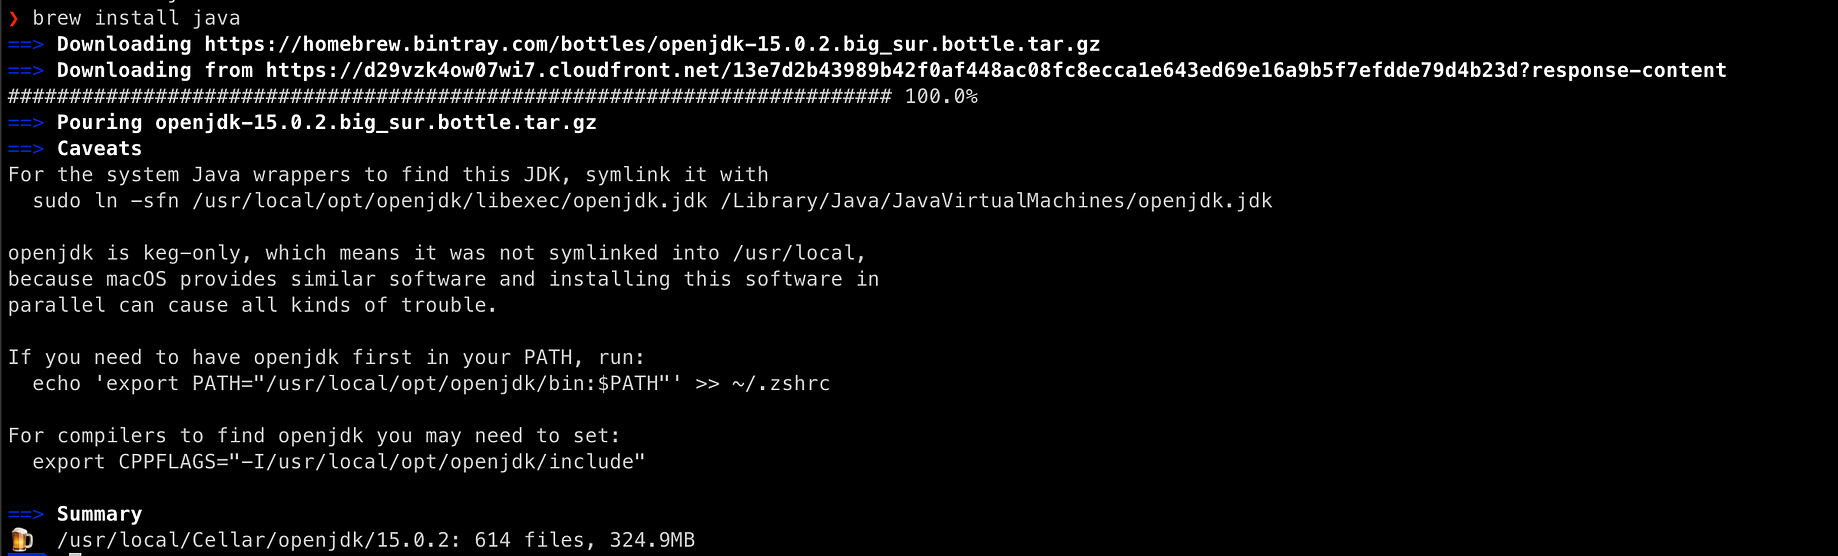 how to brew cask install java7